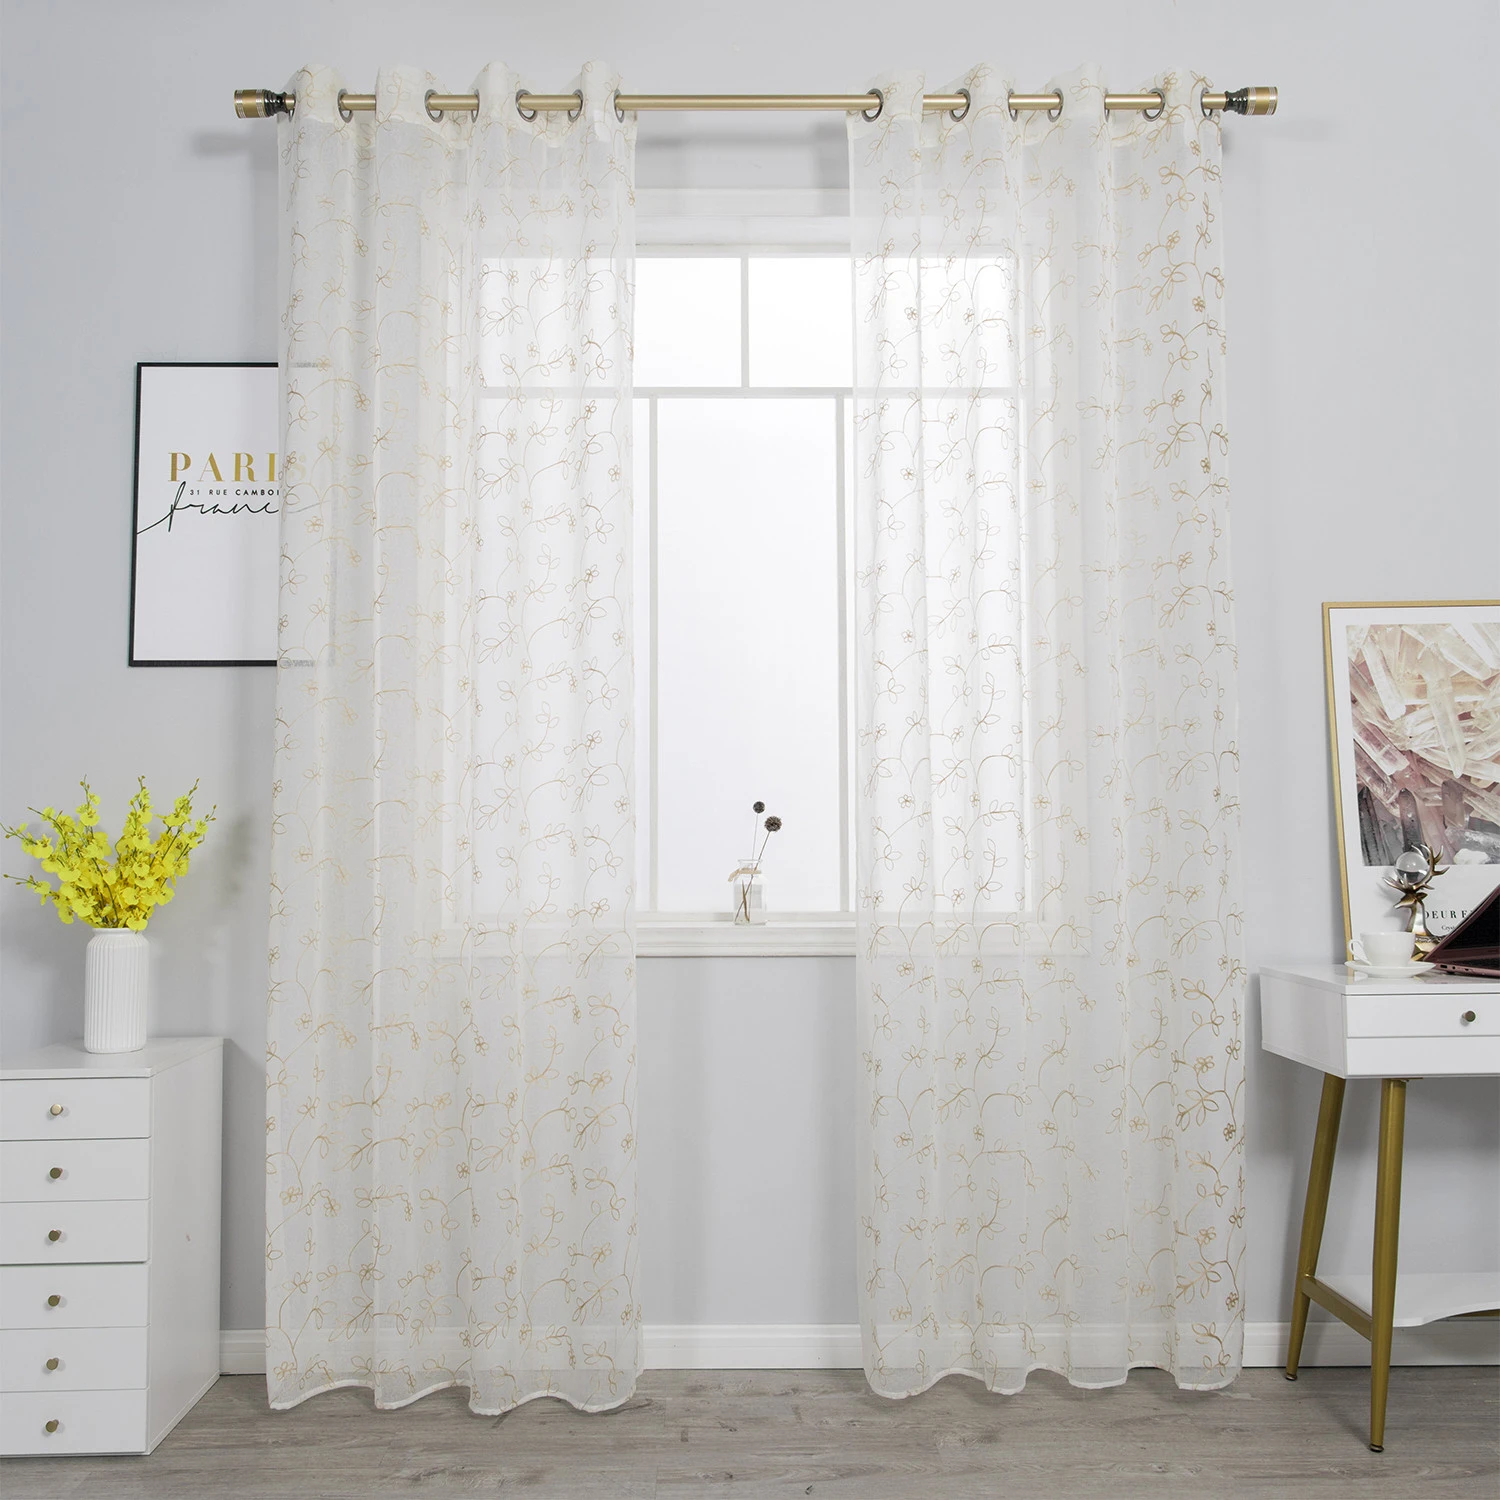 Floral Blossom Embroidered Semi Sheer Voile See Through Curtain Drapery Grommet Top Panels for Living Room